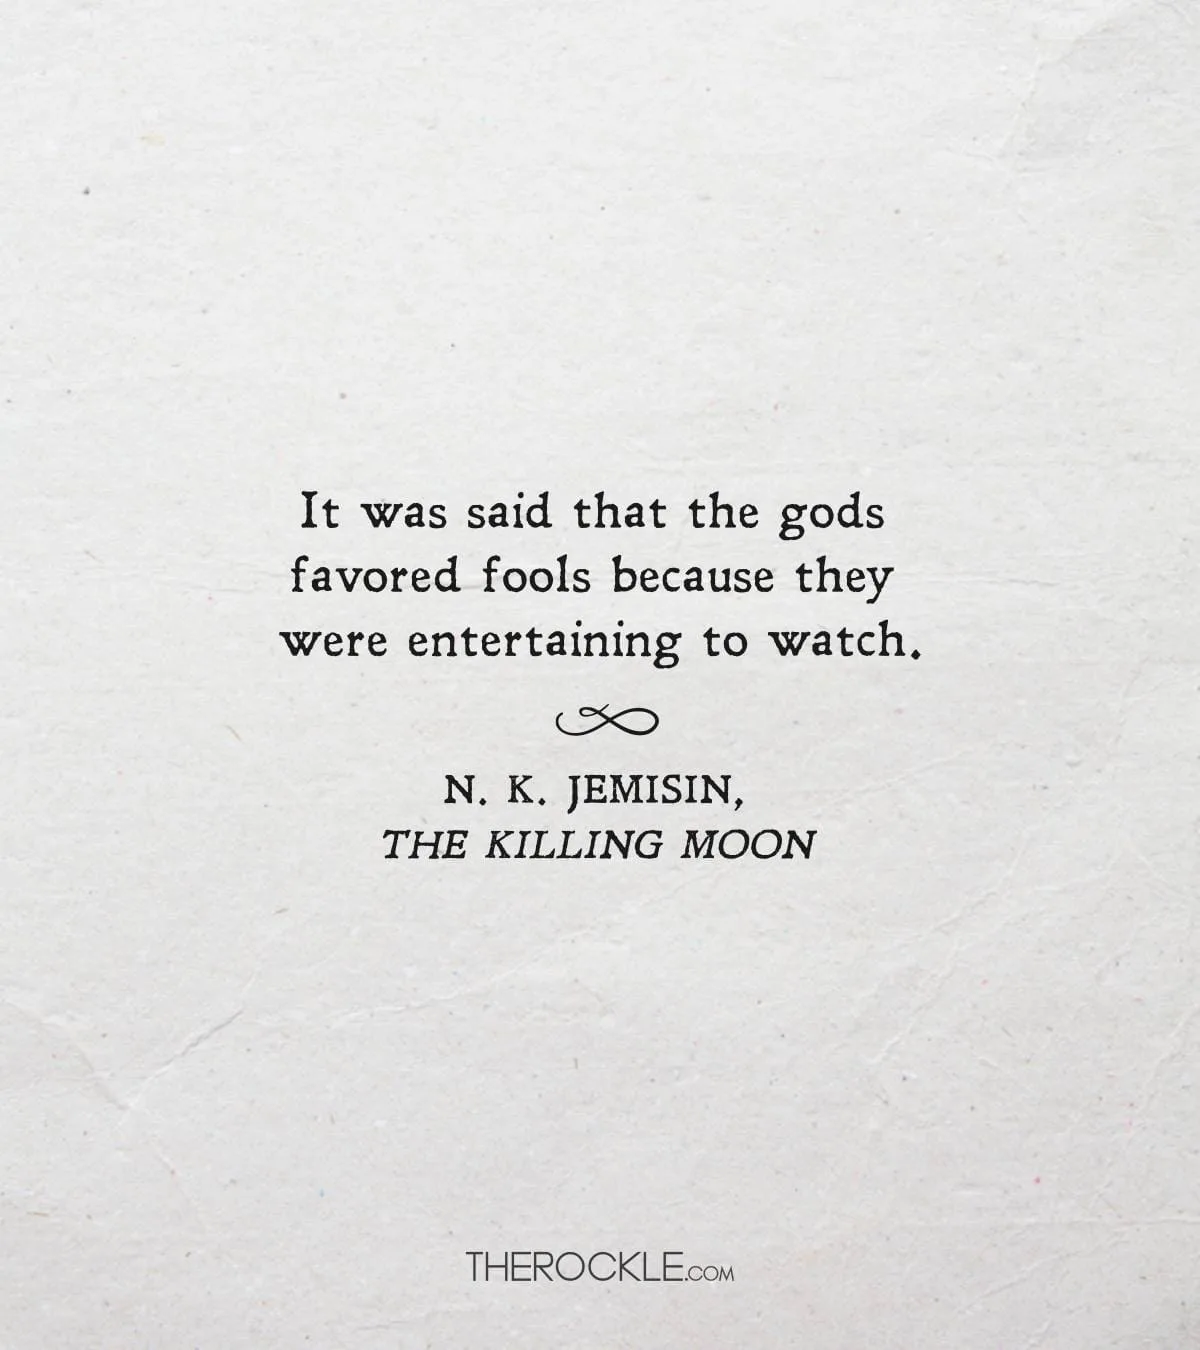 Quote from N.K. Jemisin's The Killing Moon book